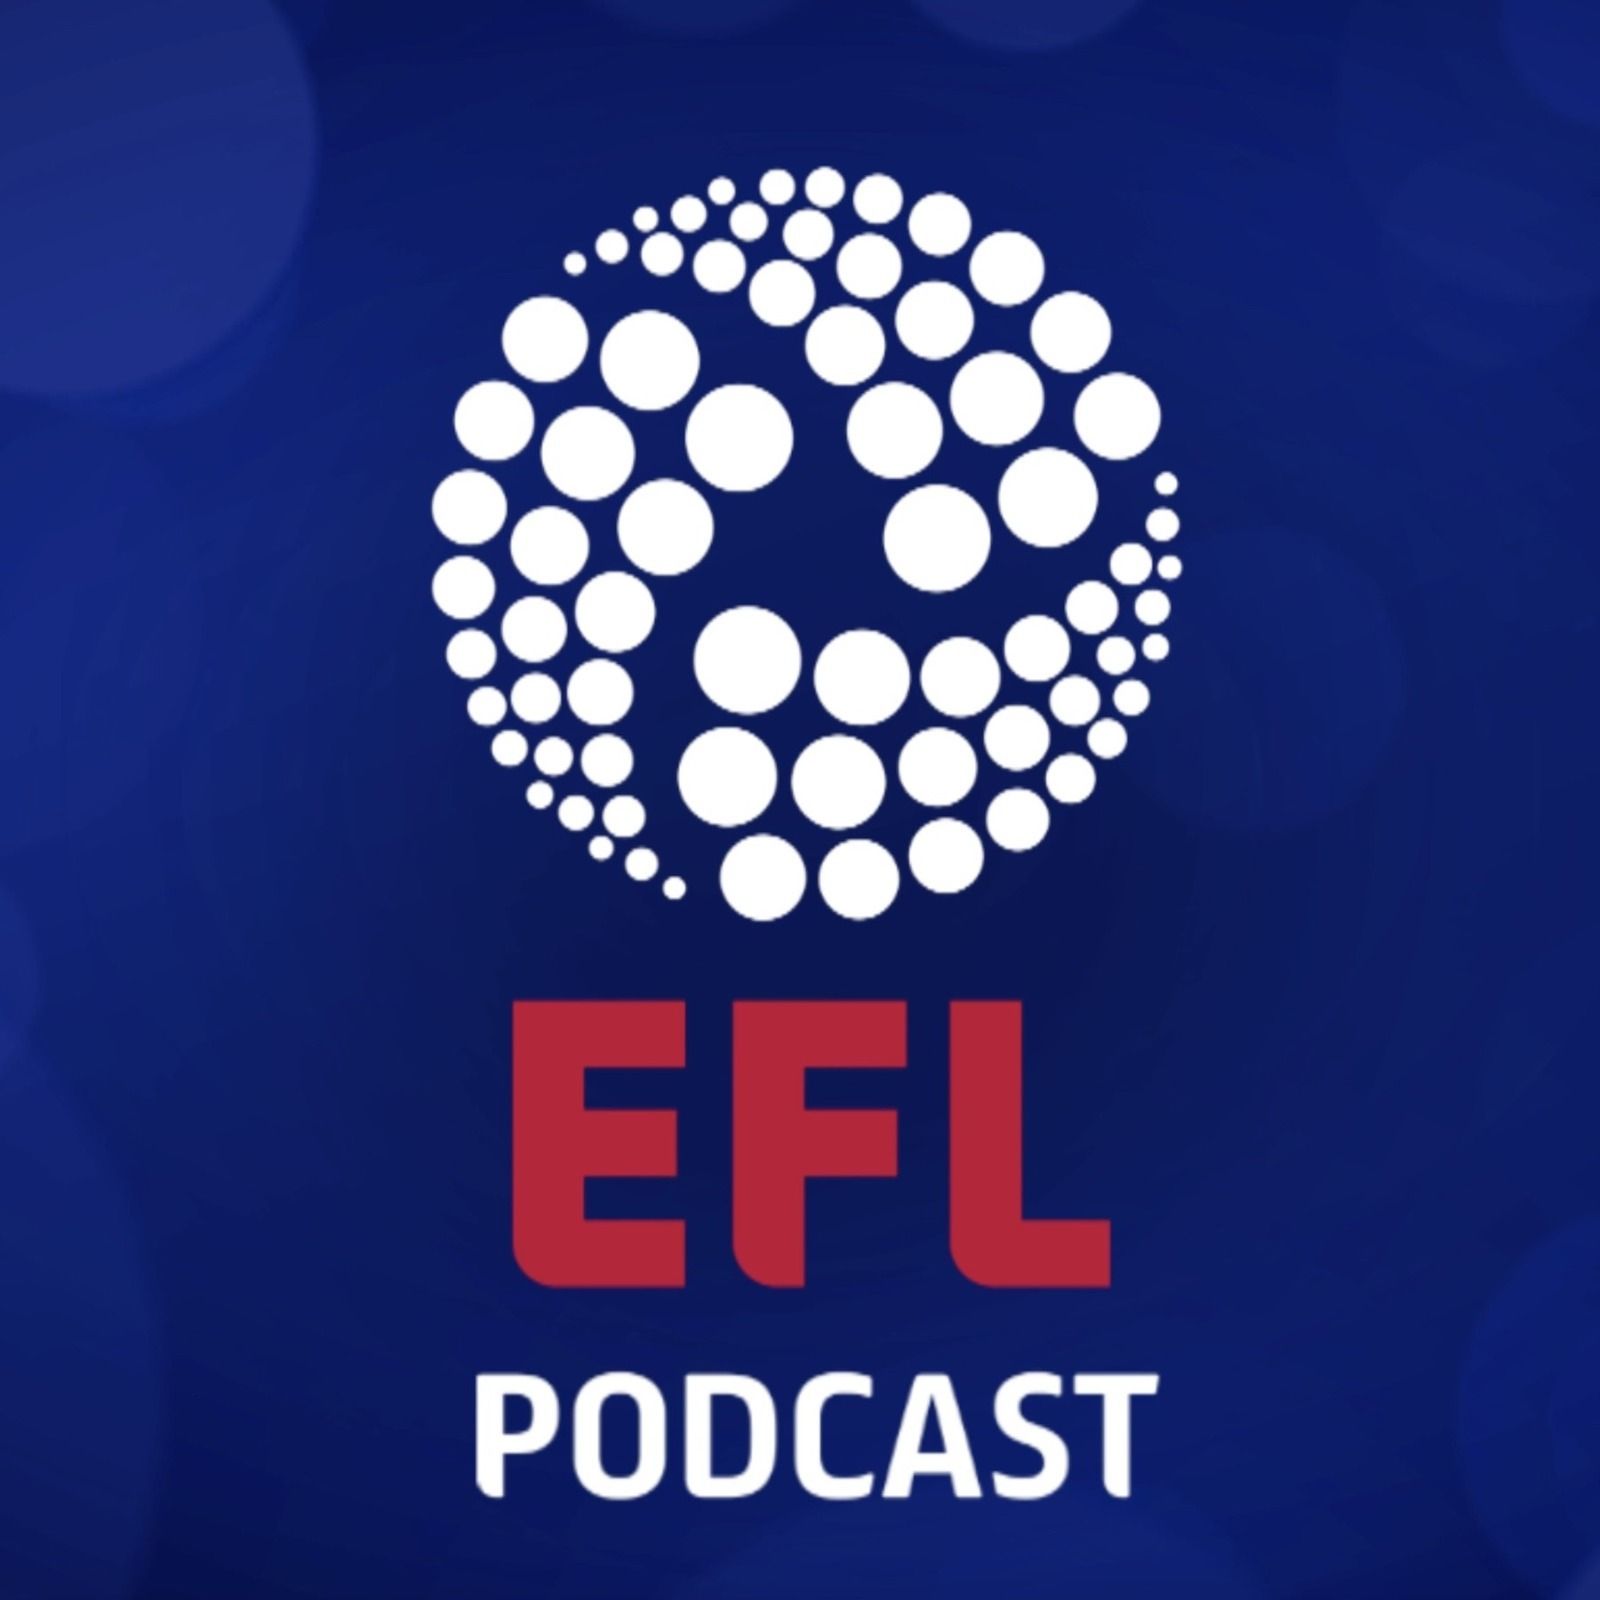 S3 Ep22: Murray, Mullin and Moore’s the merrier on the official EFL podcast.